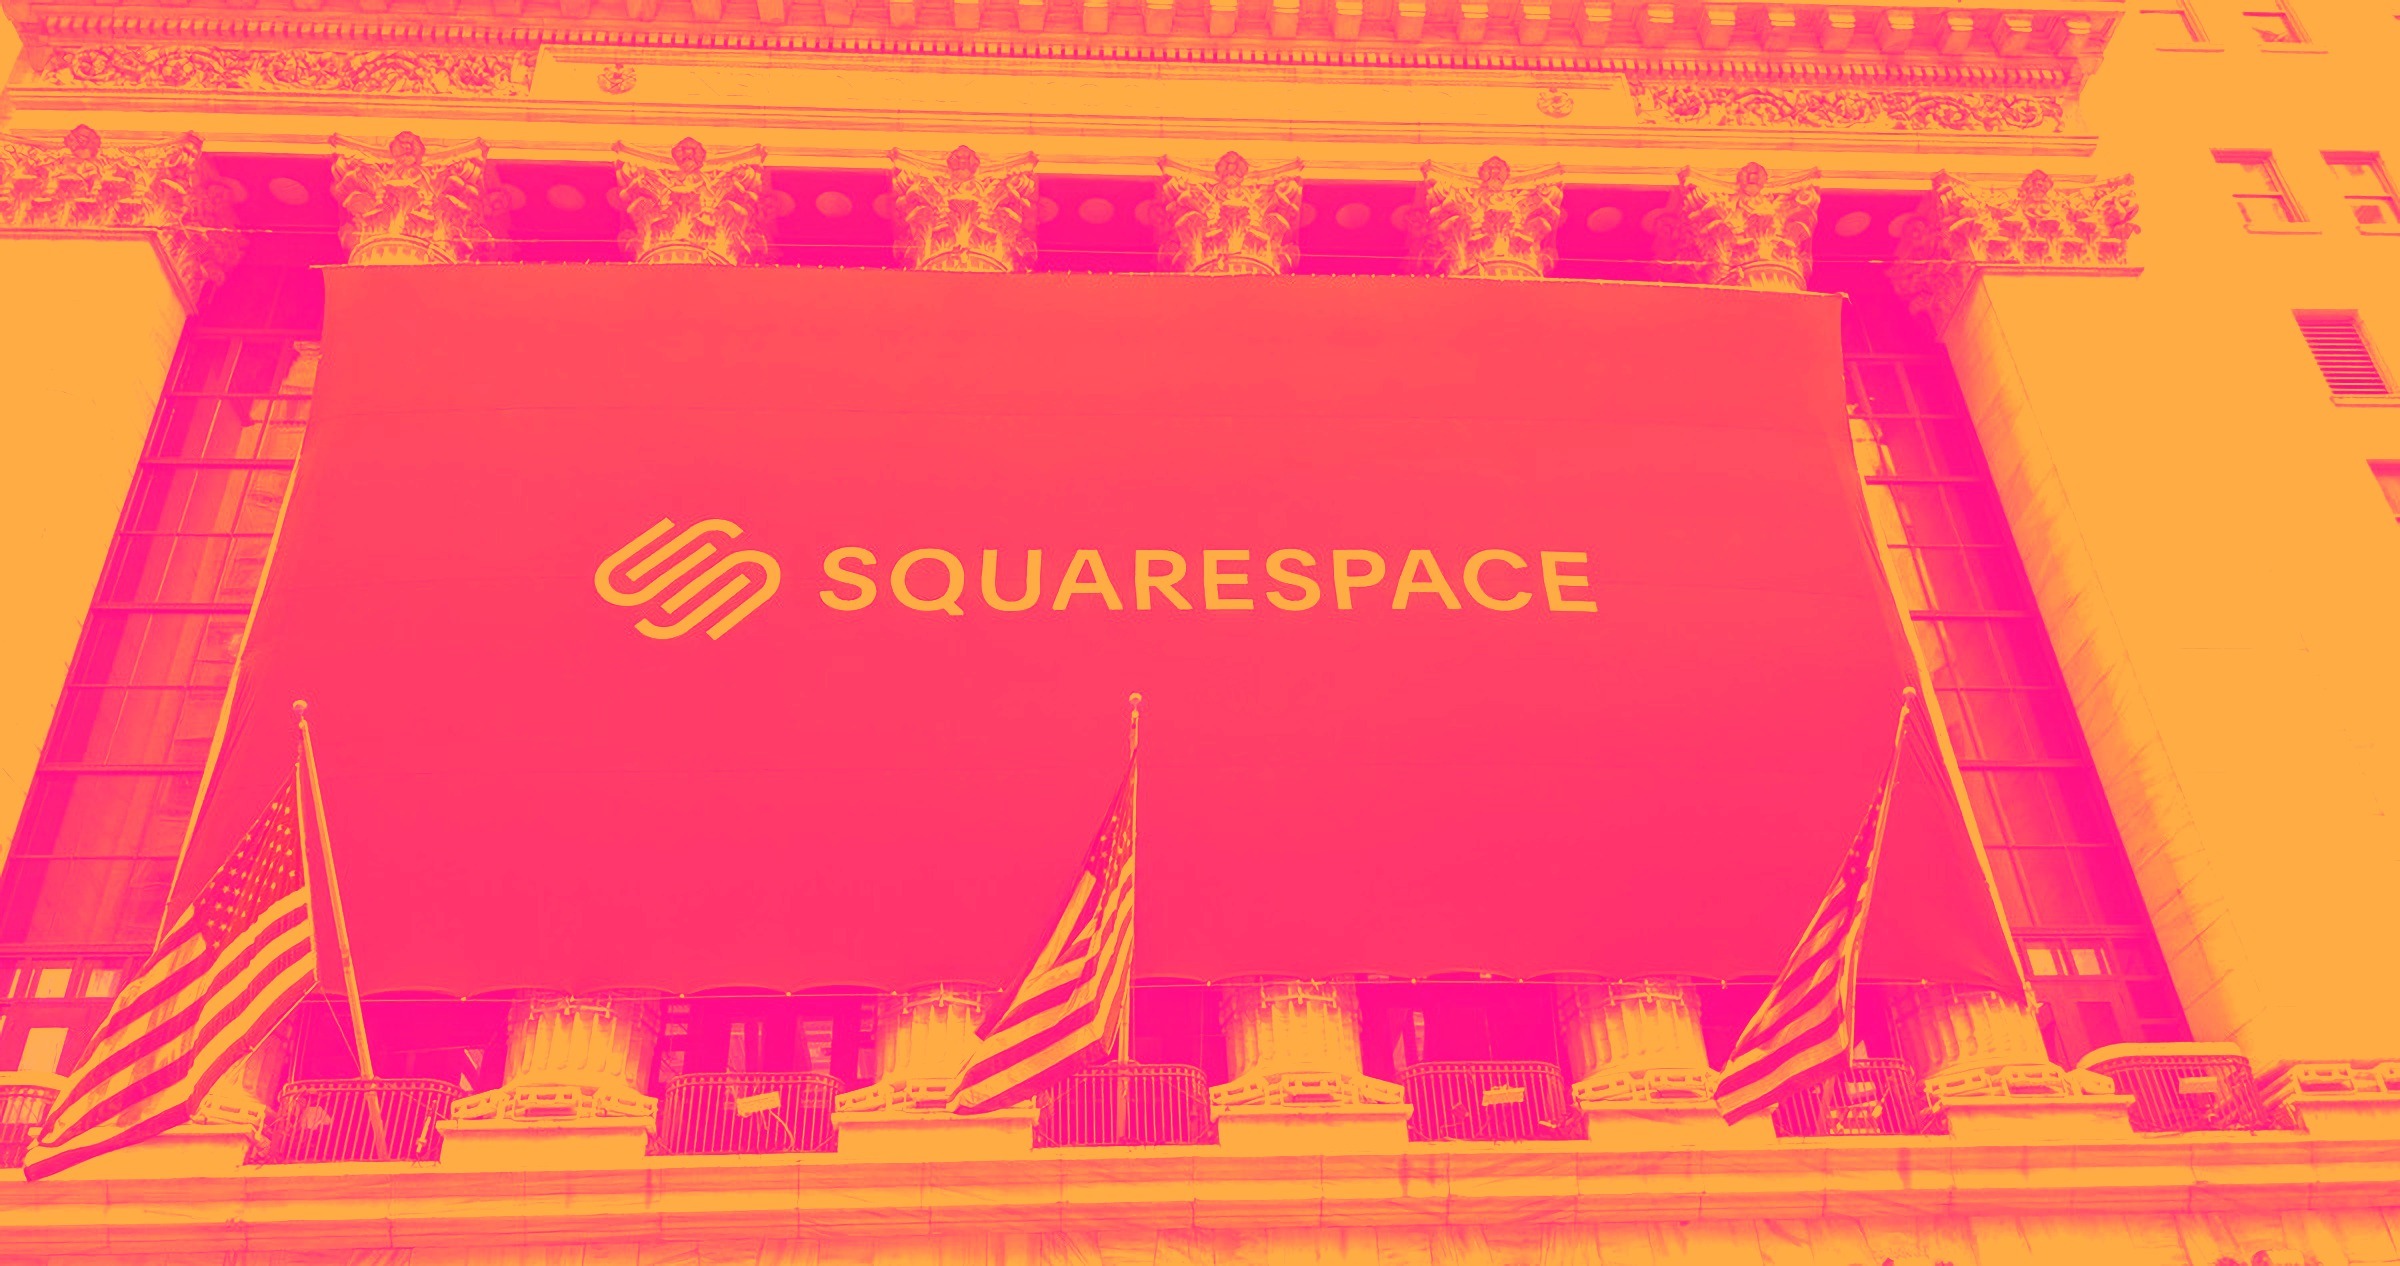 Squarespace cover image p YLP Zf A0